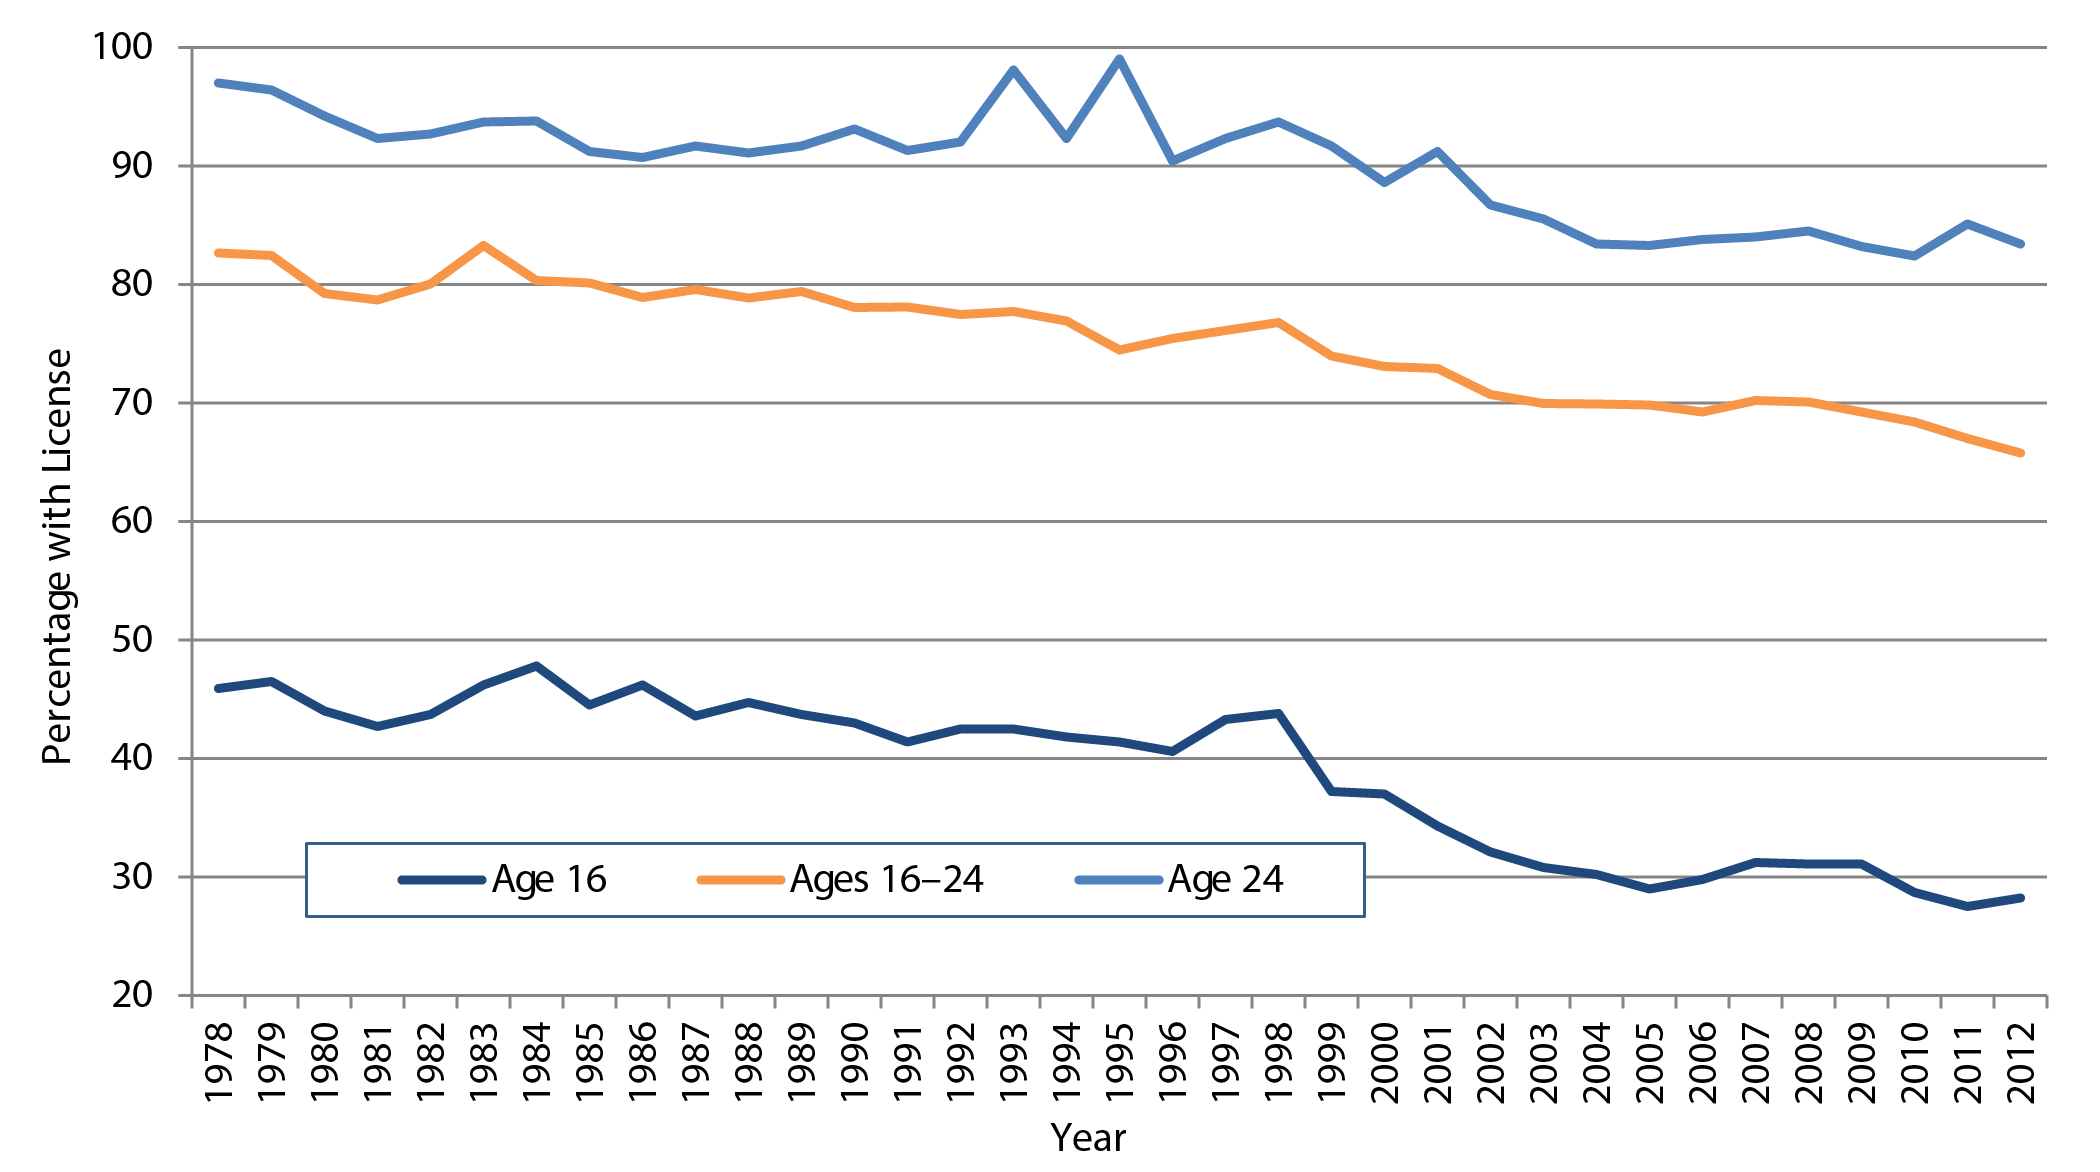 Line chart shows percentages of 16, 24, and 16-24 year olds with licenses over the years 1978 to 2012. For 16 year olds, the trend begins with an initial percentage of 45.9 in 1978. The trend starts downward to 42.7 percent in 1981, where it then increases to 47.8 percent in 1984. The trend continues in a variable pattern with 44.5 percent in 1985, 46.2 percent in 1986, 43.6 percent in 1987, and 44.7 percent in 1988. The trend then slowly decreases to about 41 percent in 1996 and increases to reach approximately 44 percent in 1998. The trend then slopes downward to a value of 37 percent in 1999 and 2000 and continues to decrease to 29 percent in 2005, ending at 28 percent in 2012. For 24 year olds, the trend begins with an initial percentage of 97 in 1978. The trend starts downward to 90.7 percent in 1986, where it then increases to 93.1 percent in 1990. Following this increase, there is a slight decrease before going sharply upward to 98.1 percent in 1993. The trend continues in a variable pattern with 92.3 percent in 1994, its highest point of 99 percent in 1995, 90.4 percent in 1996, and 92.3 percent in 1997. The trend then slowly decreases to 82.4 percent in 2010 before increasing to an ending percentage of 83.4 in 2012. For 16-24 year olds, the trend begins with an initial percentage of 82.7 in 1978. The trend starts downward to 78.7 percent in 1981, where it then increases to its highest percent at 83.3 in 1983. Following this increase, there is a consistent downward fall of percentages with percentages at 74.5 in 1995, 69.2 in 2006, finally ending at its lowest percentage of 65.8 in 2012. Source:  Highway Statistics, Table DL-20.  